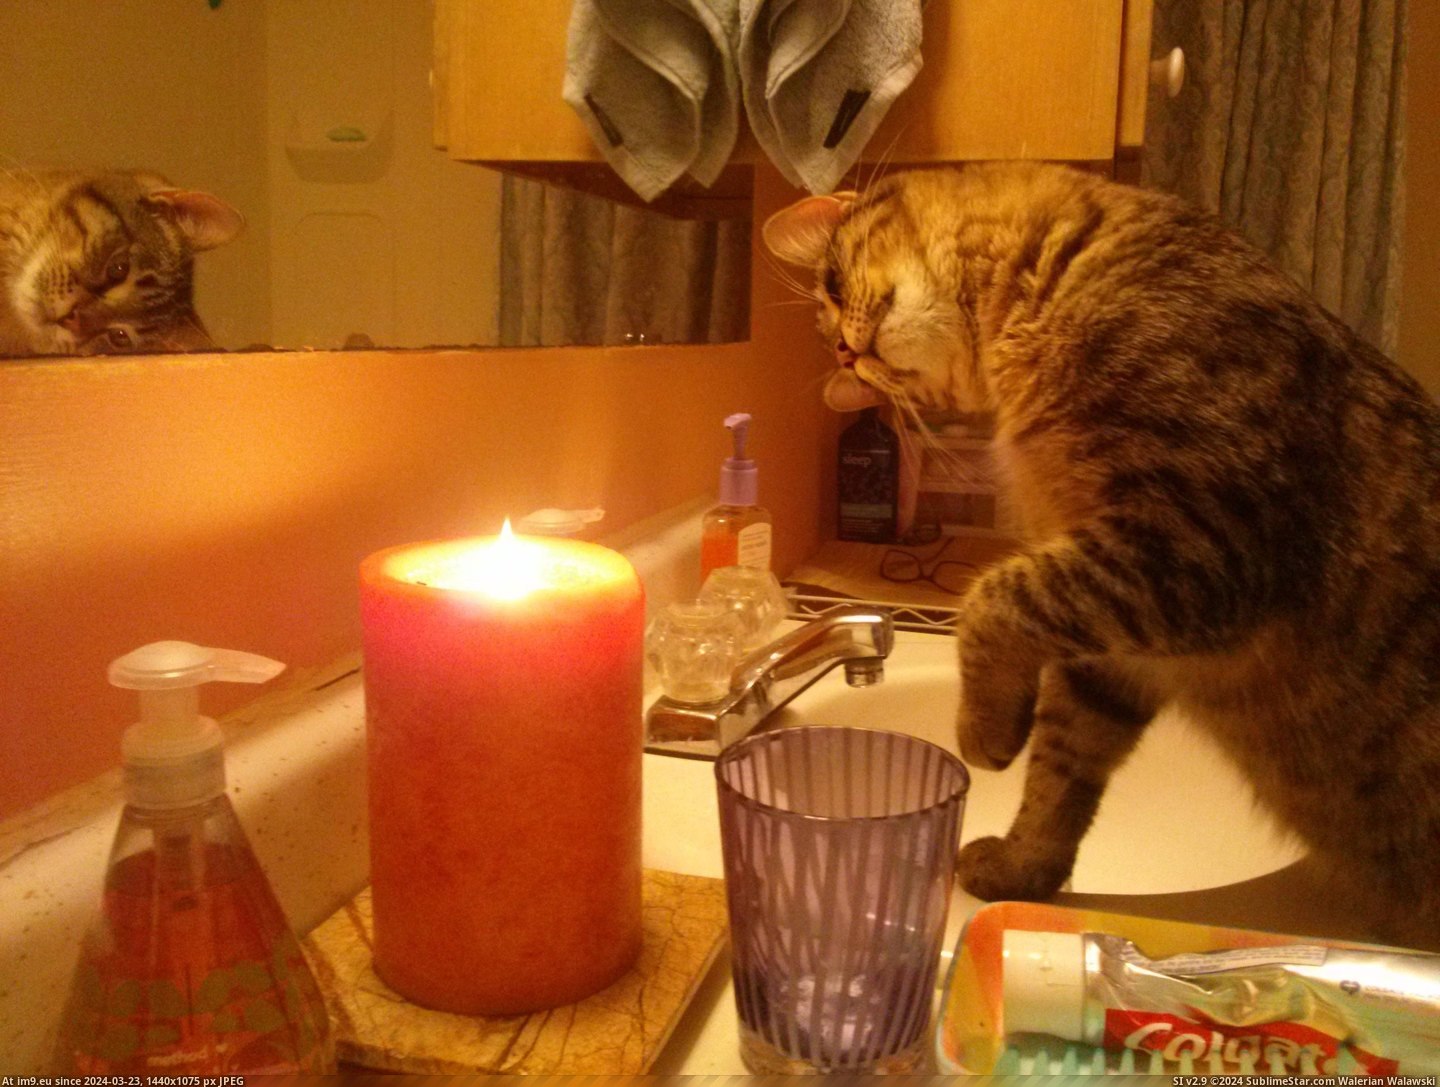 #Kitty #Learning #Fire [Aww] My kitty is learning about fire Pic. (Bild von album My r/AWW favs))